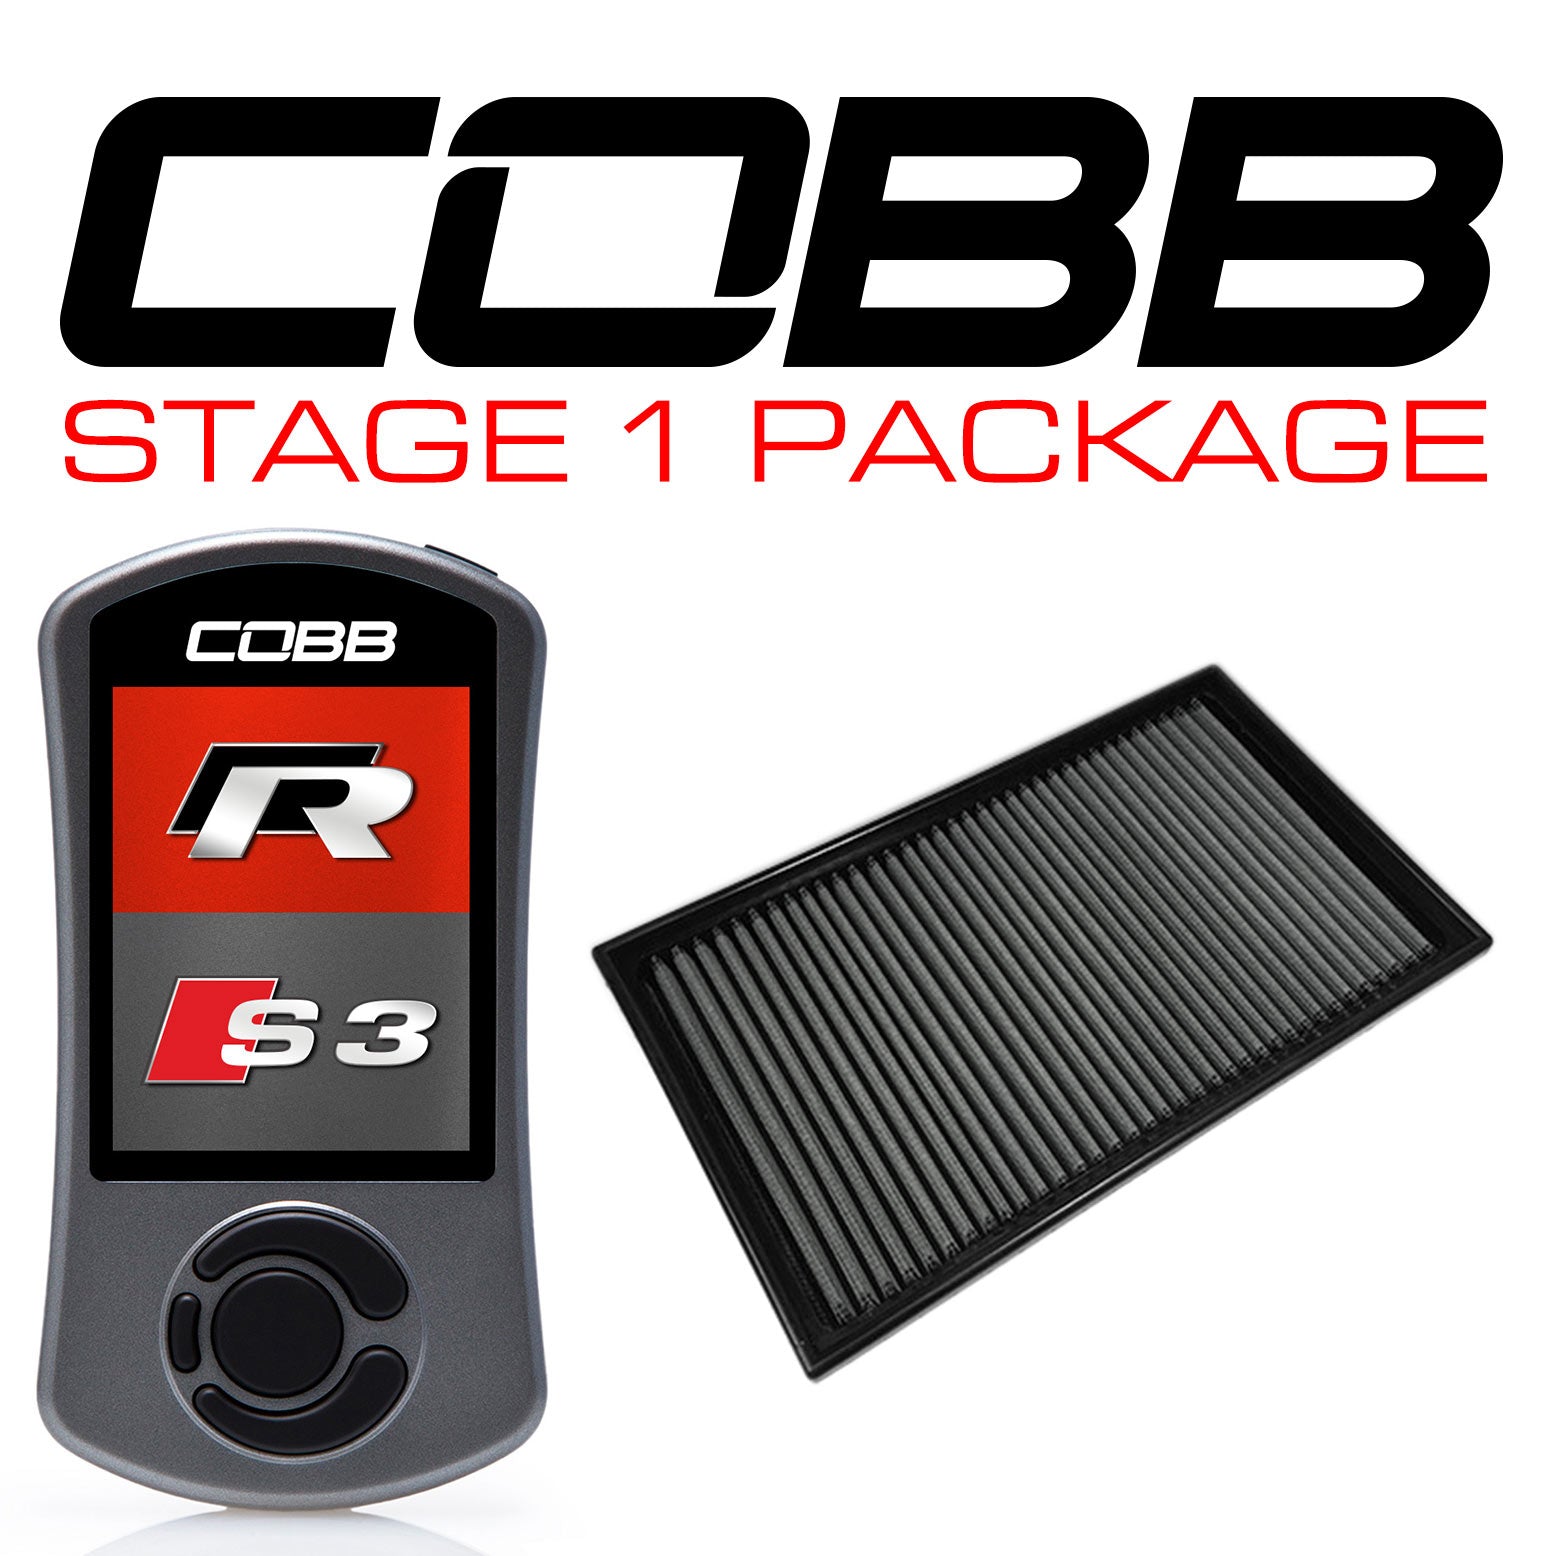 STAGE 1 POWER PACKAGE WITH DSG / S TRONIC FLASHING FOR VOLKSWAGEN (MK7/MK7.5) GOLF R, AUDI S3 (8V)